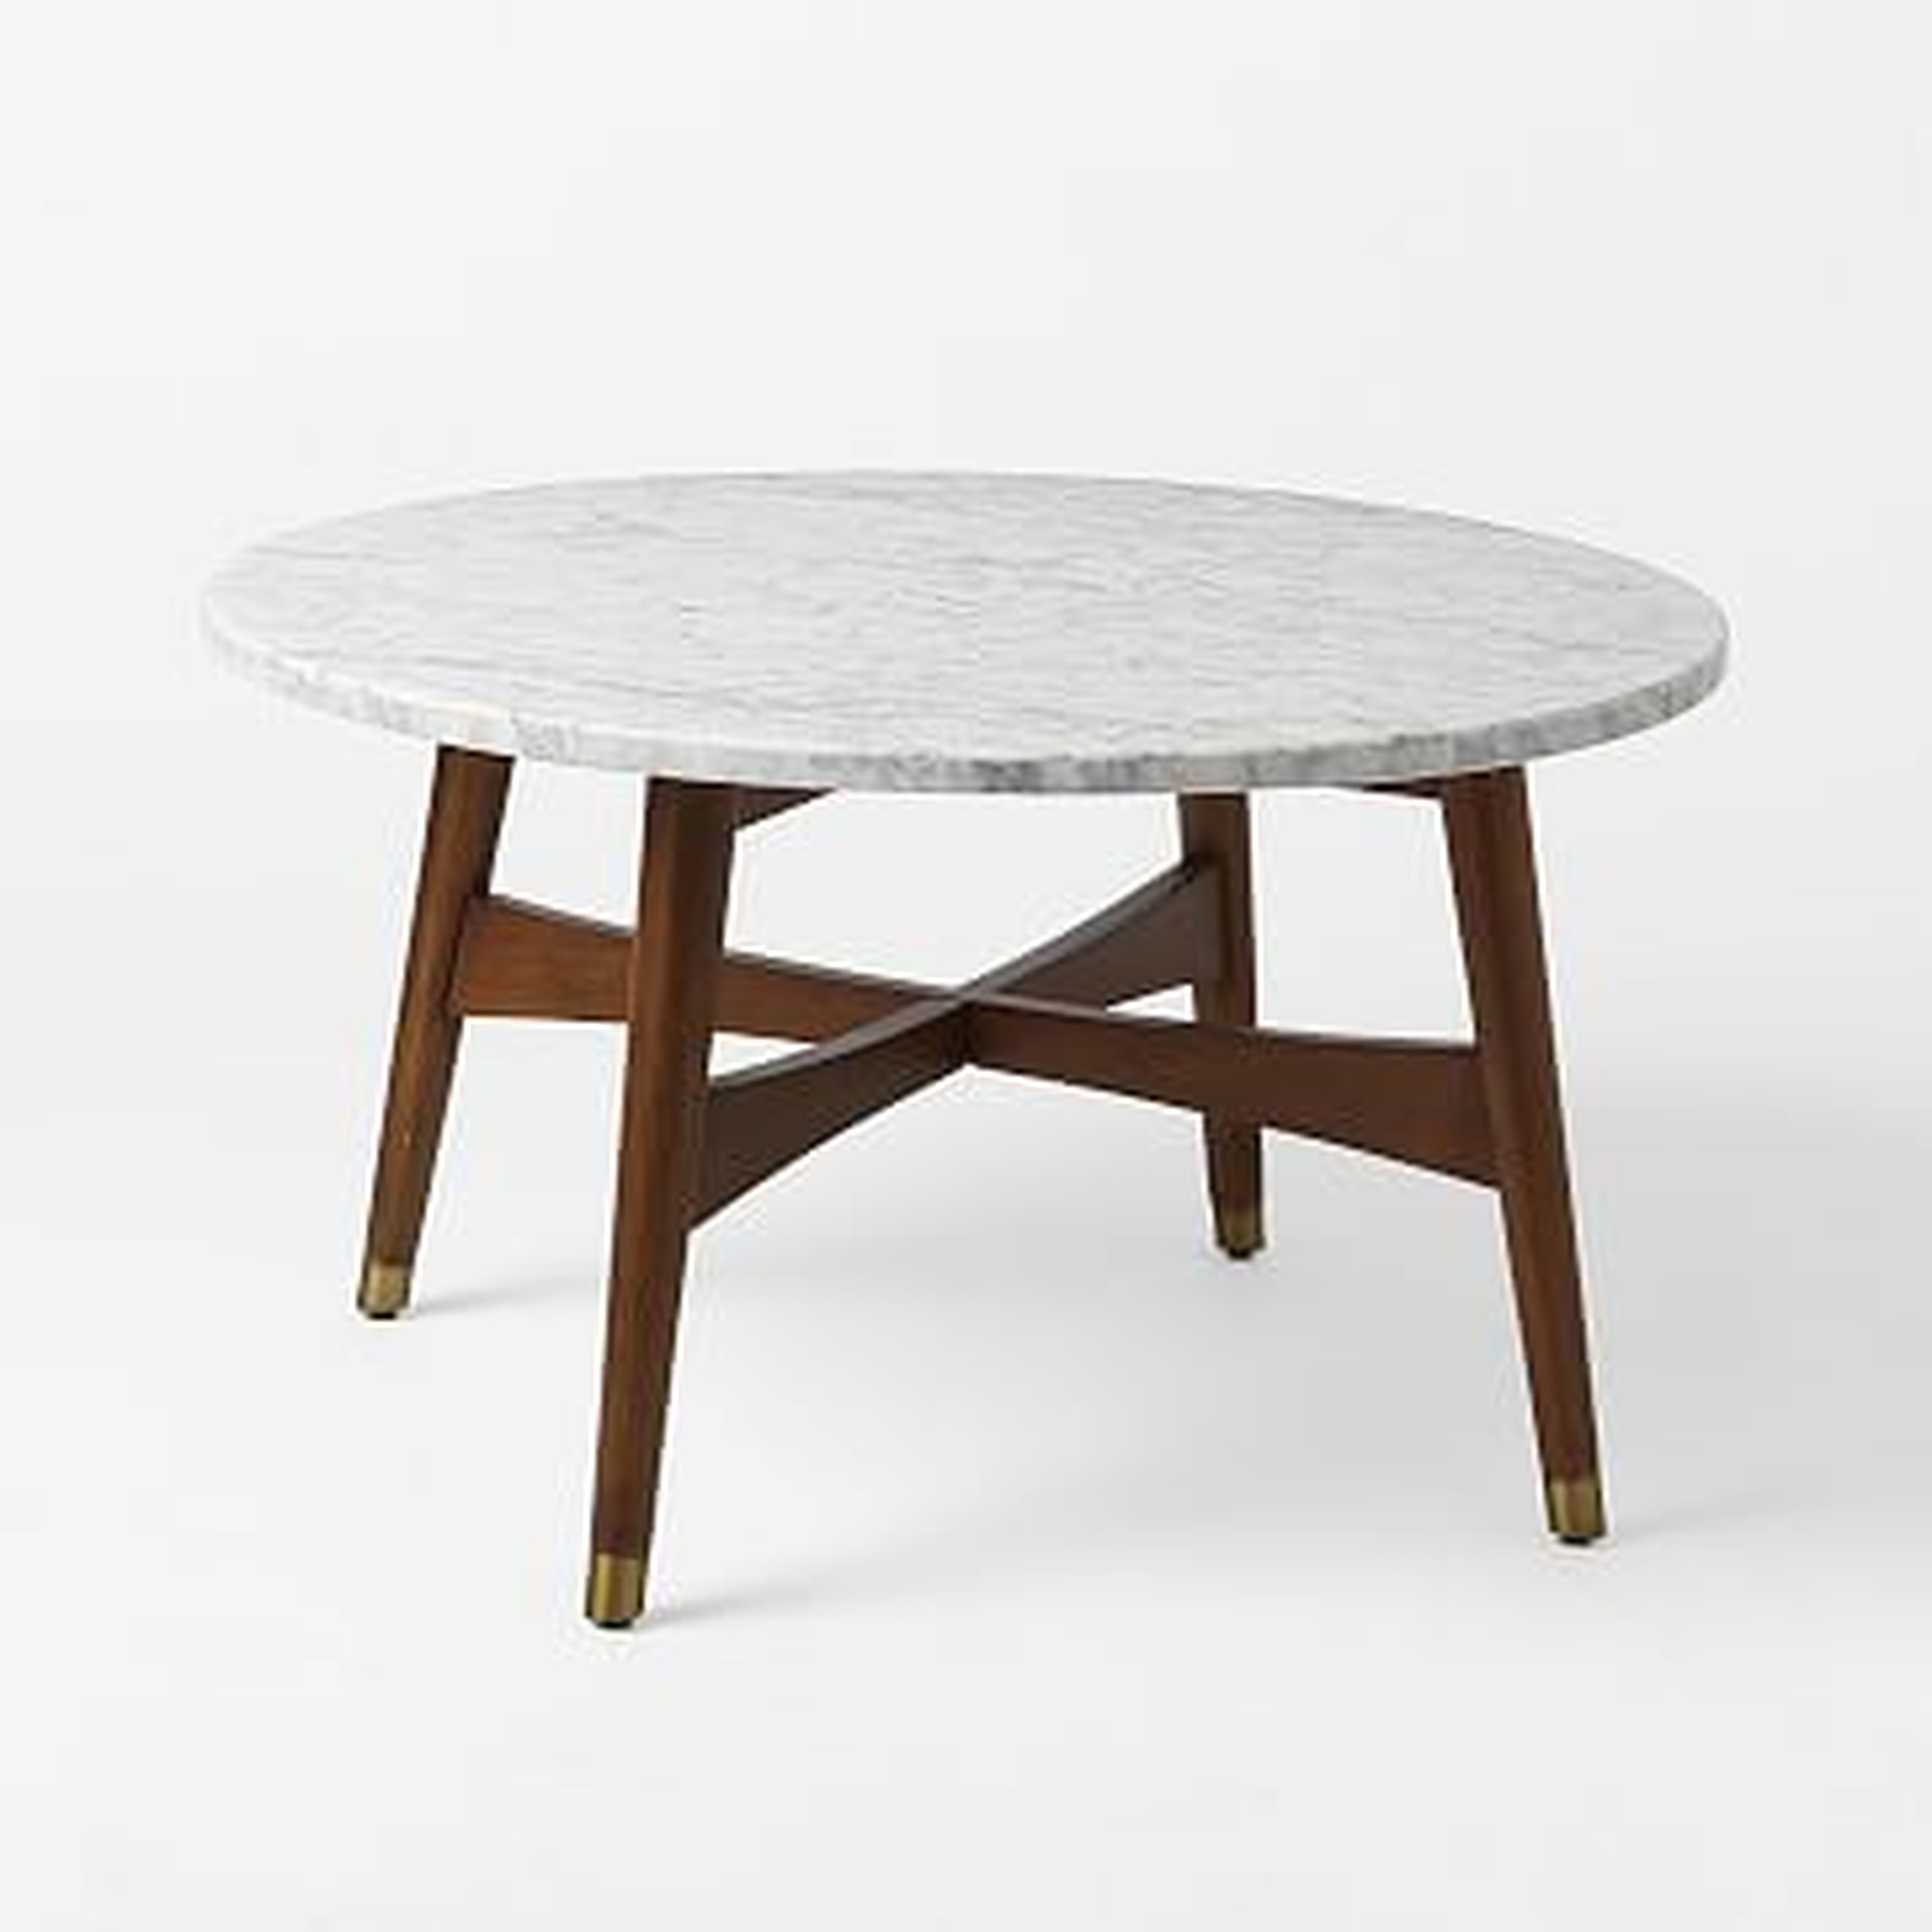 Reeve Mid-Century Coffee Table - Marble- Order now for delivery Oct. 3 - Oct. 17 - West Elm